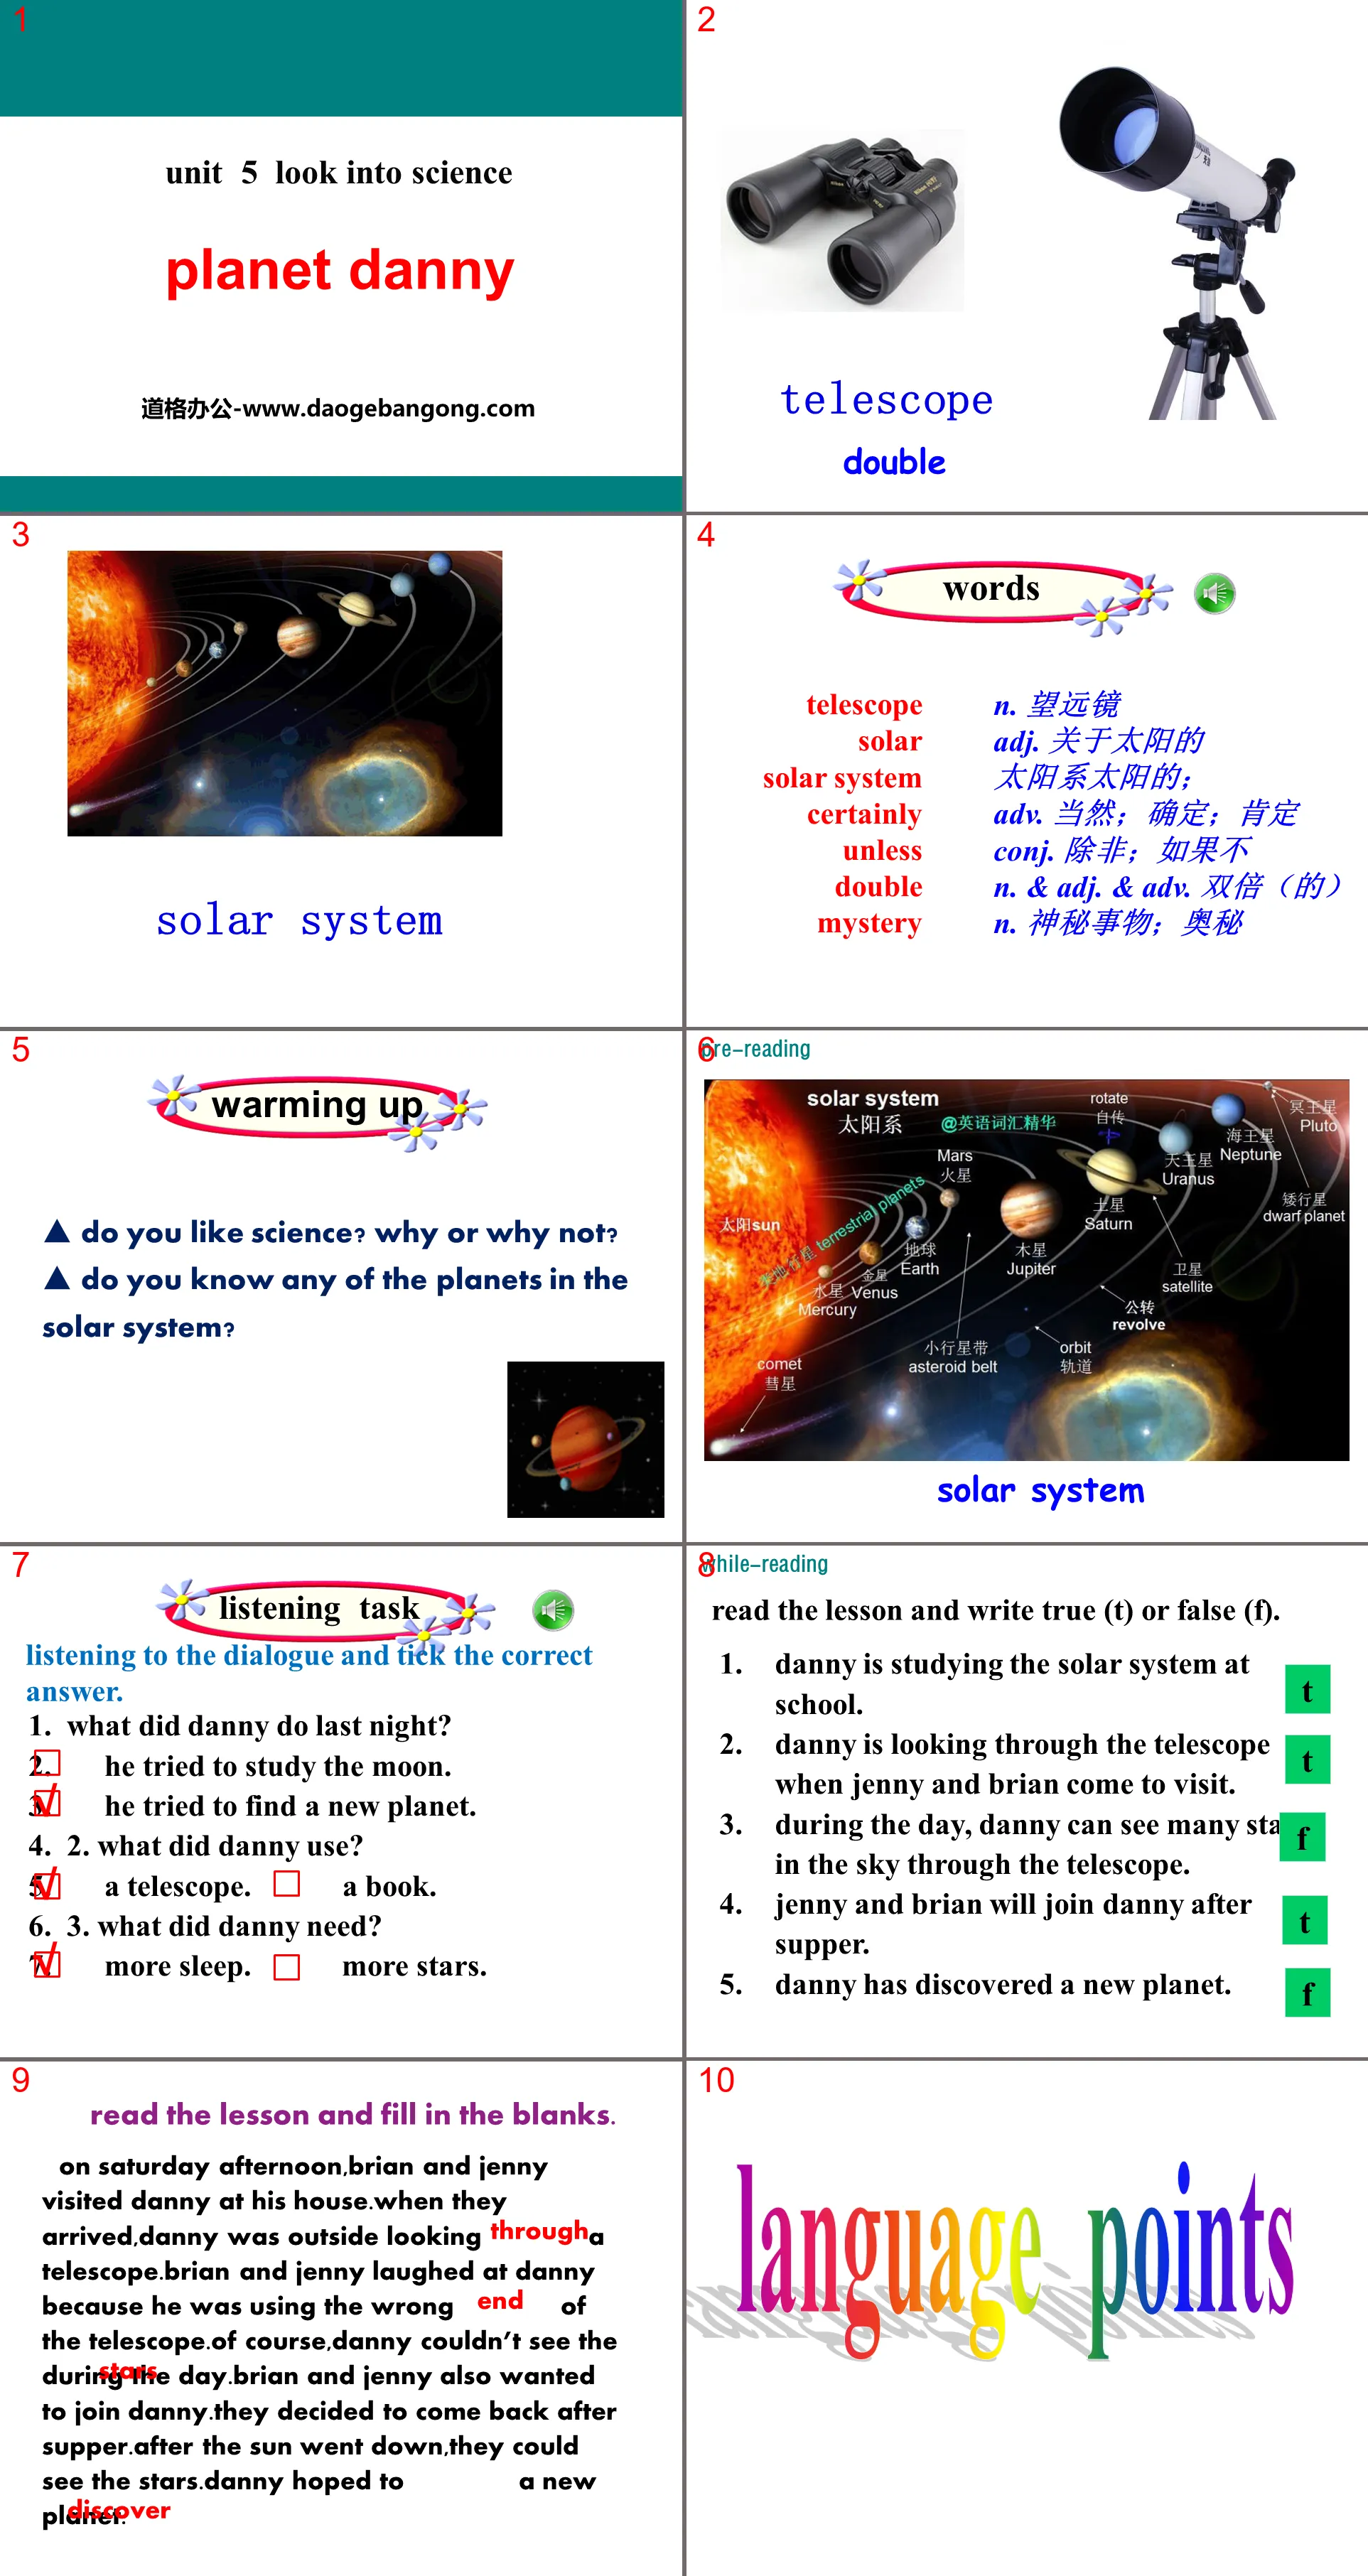 "Planet Danny" Look into Science! PPT courseware